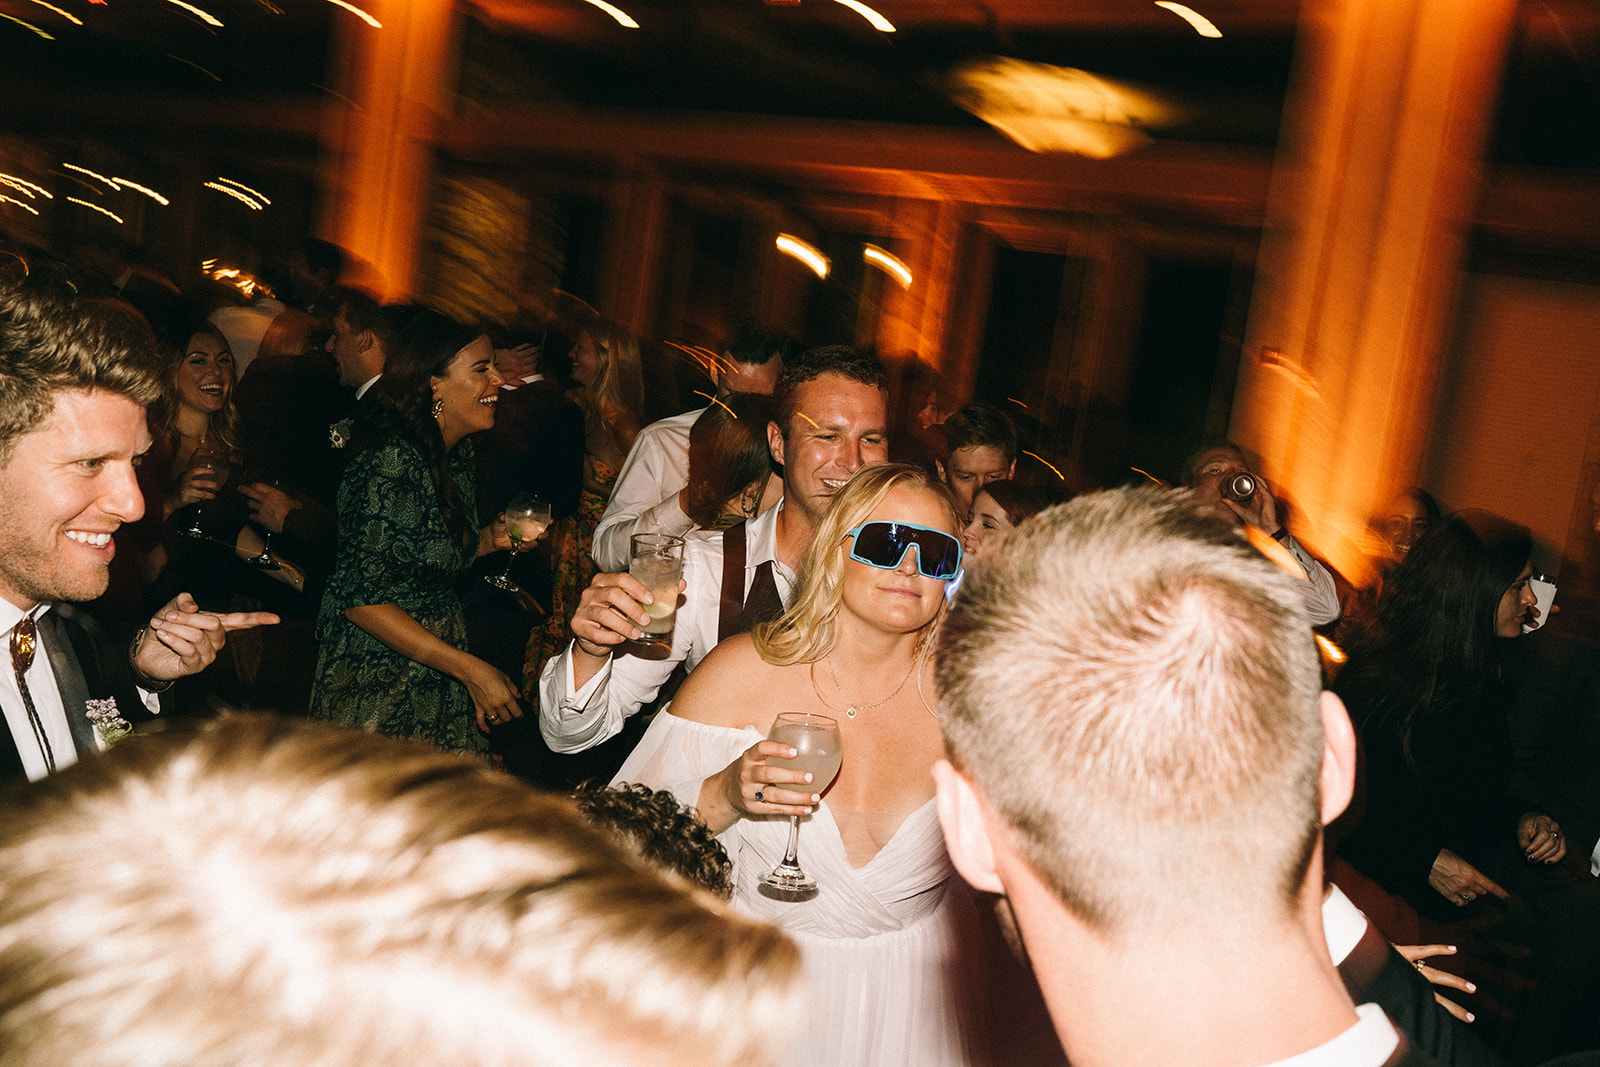 Bride in blue sunglasses holding a glass smiling and laughing with other guests while they dance 